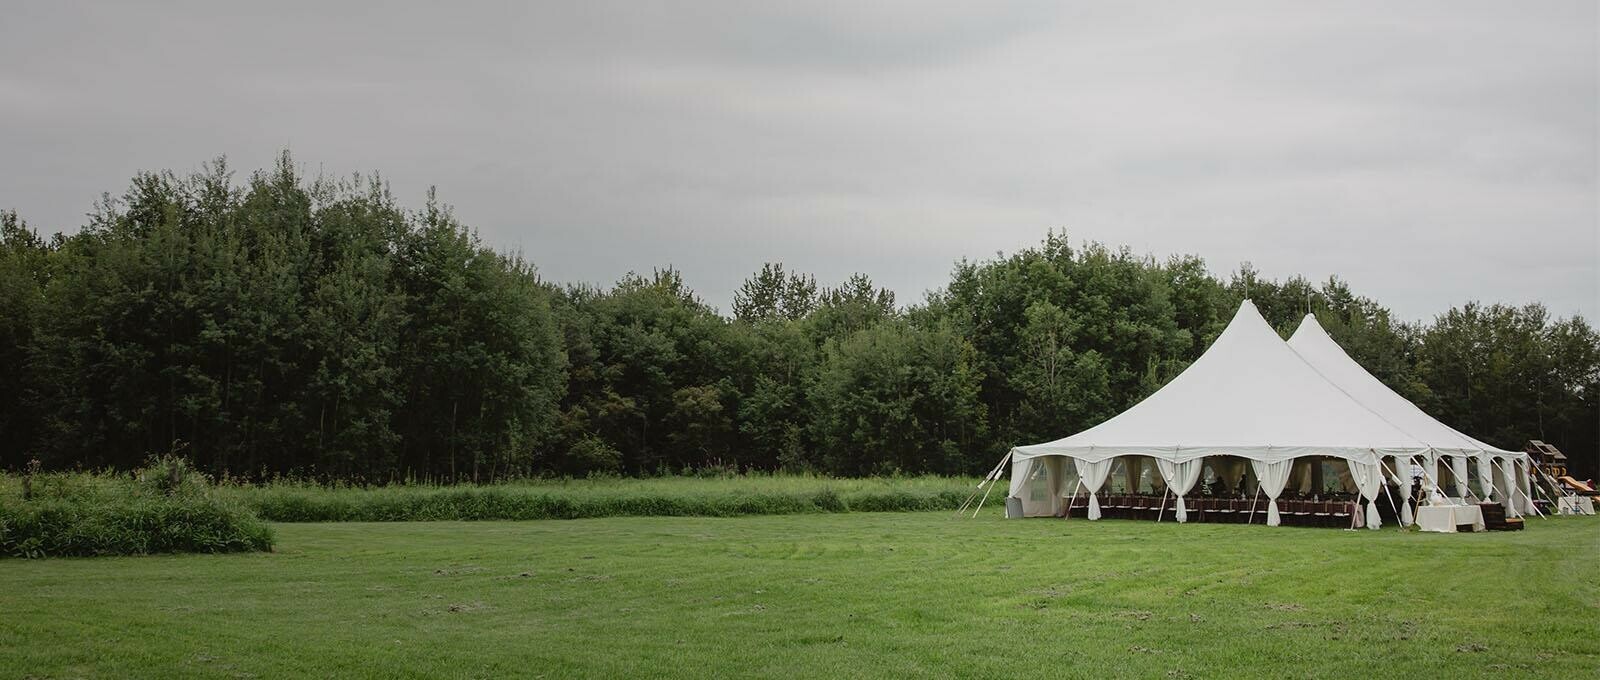 Tent Rentals Regina featuring a white Pole Pent on a grassy field for a wedding reception.